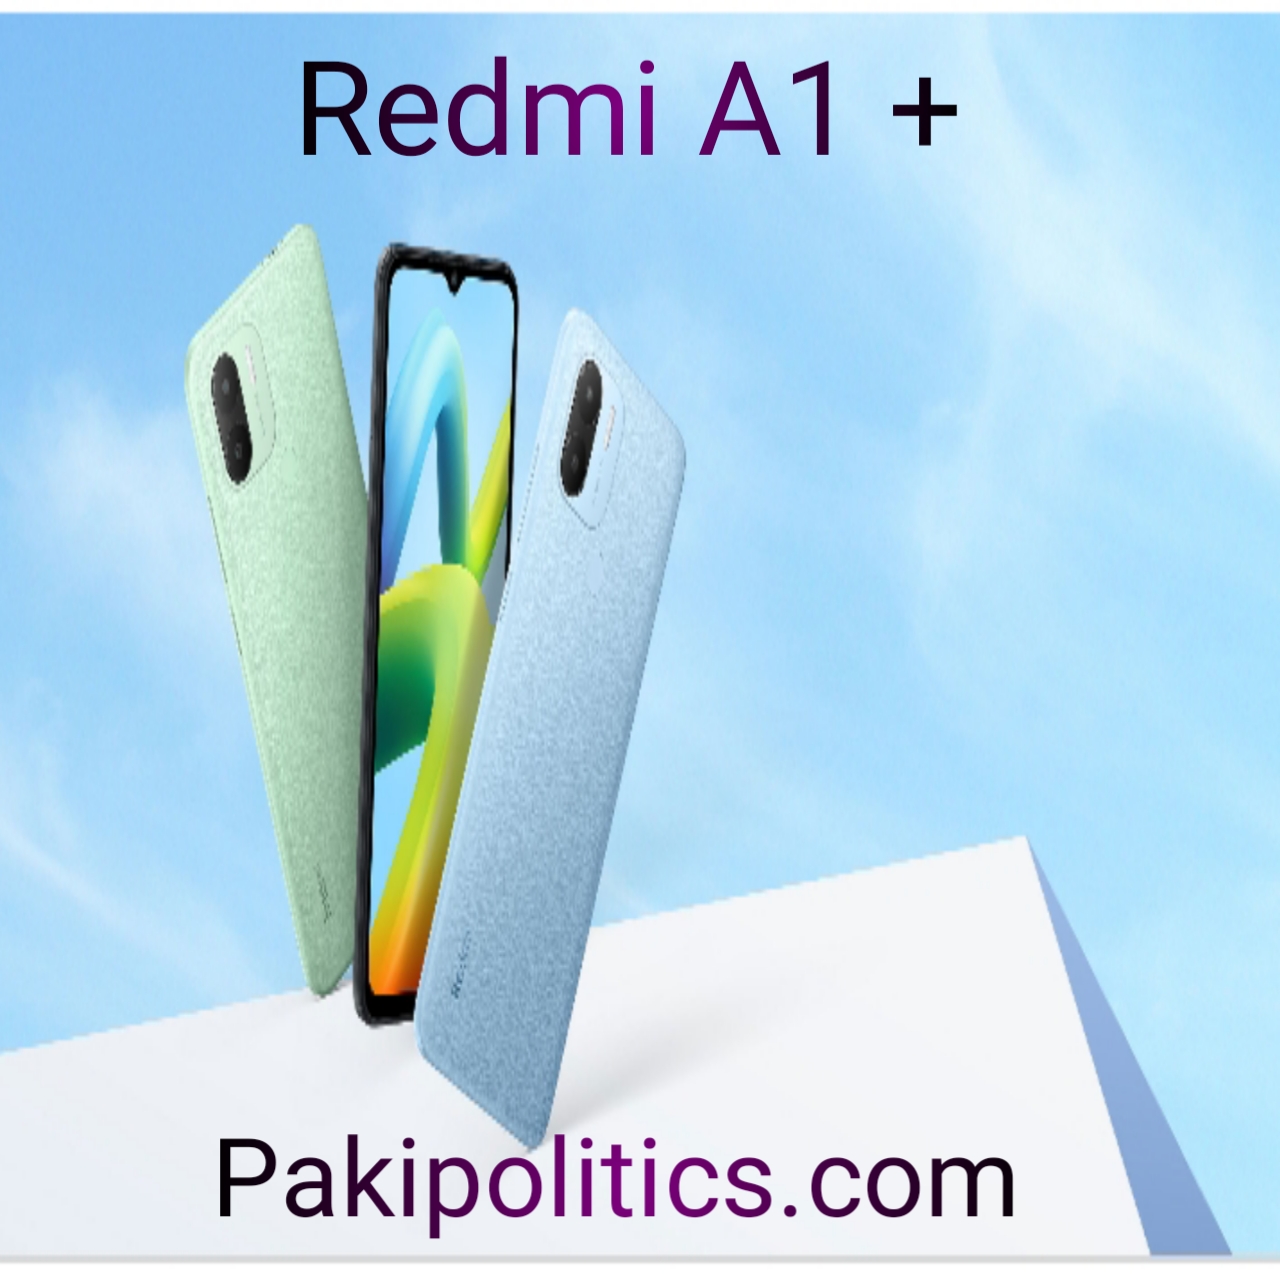 Redmi A1 In addition to Could Come Soon to Pakistan Helio A22 Chip 5000 mAh Cell.